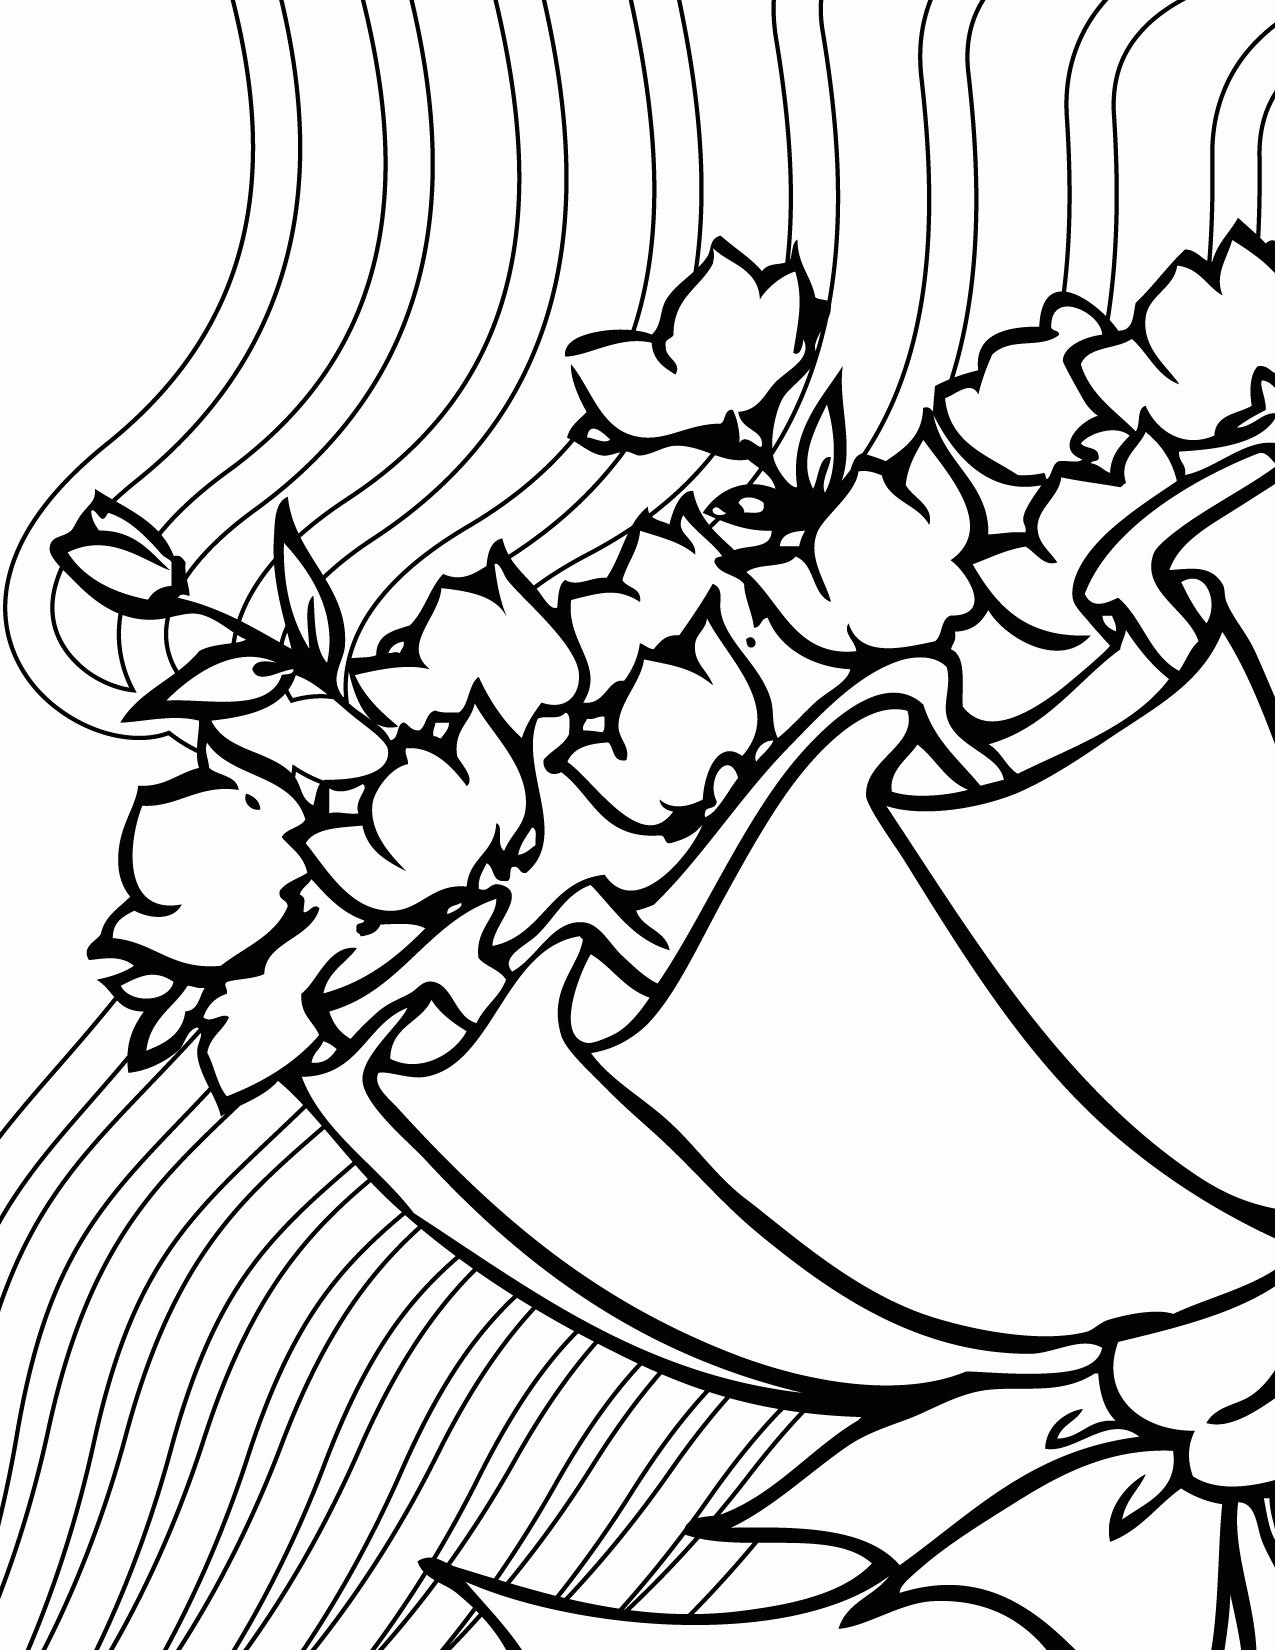 Download Wedding Bouquet Coloring Pages - Coloring Home